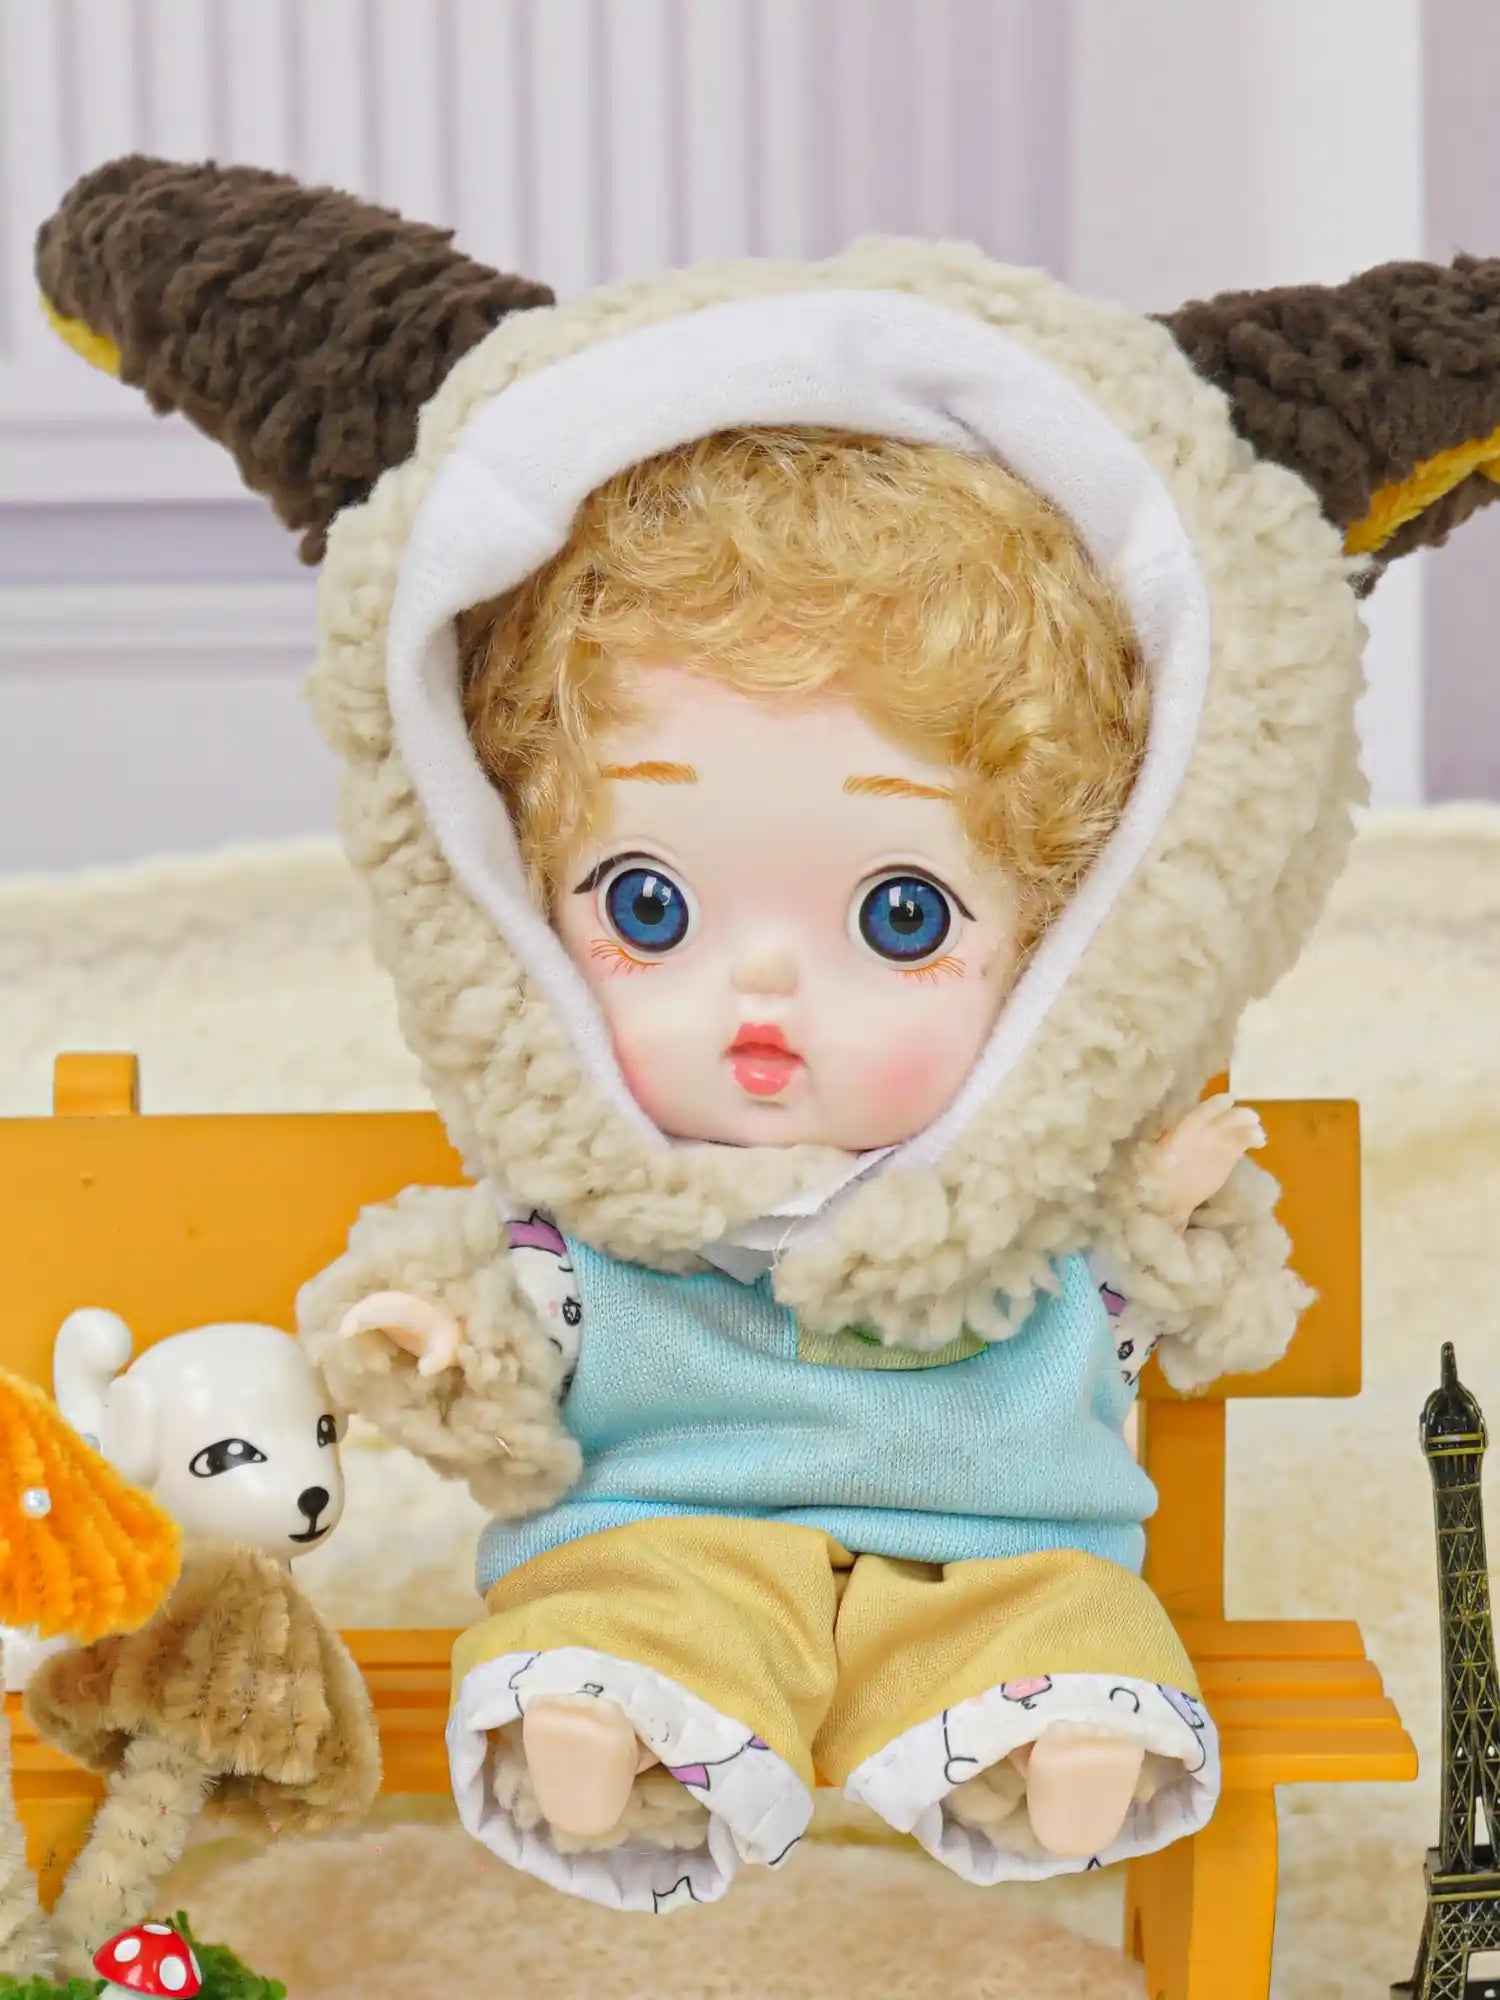 A ball-jointed doll with lamb ears and a loving gaze, nestled next to a small Eiffel Tower and a puppy figurine.